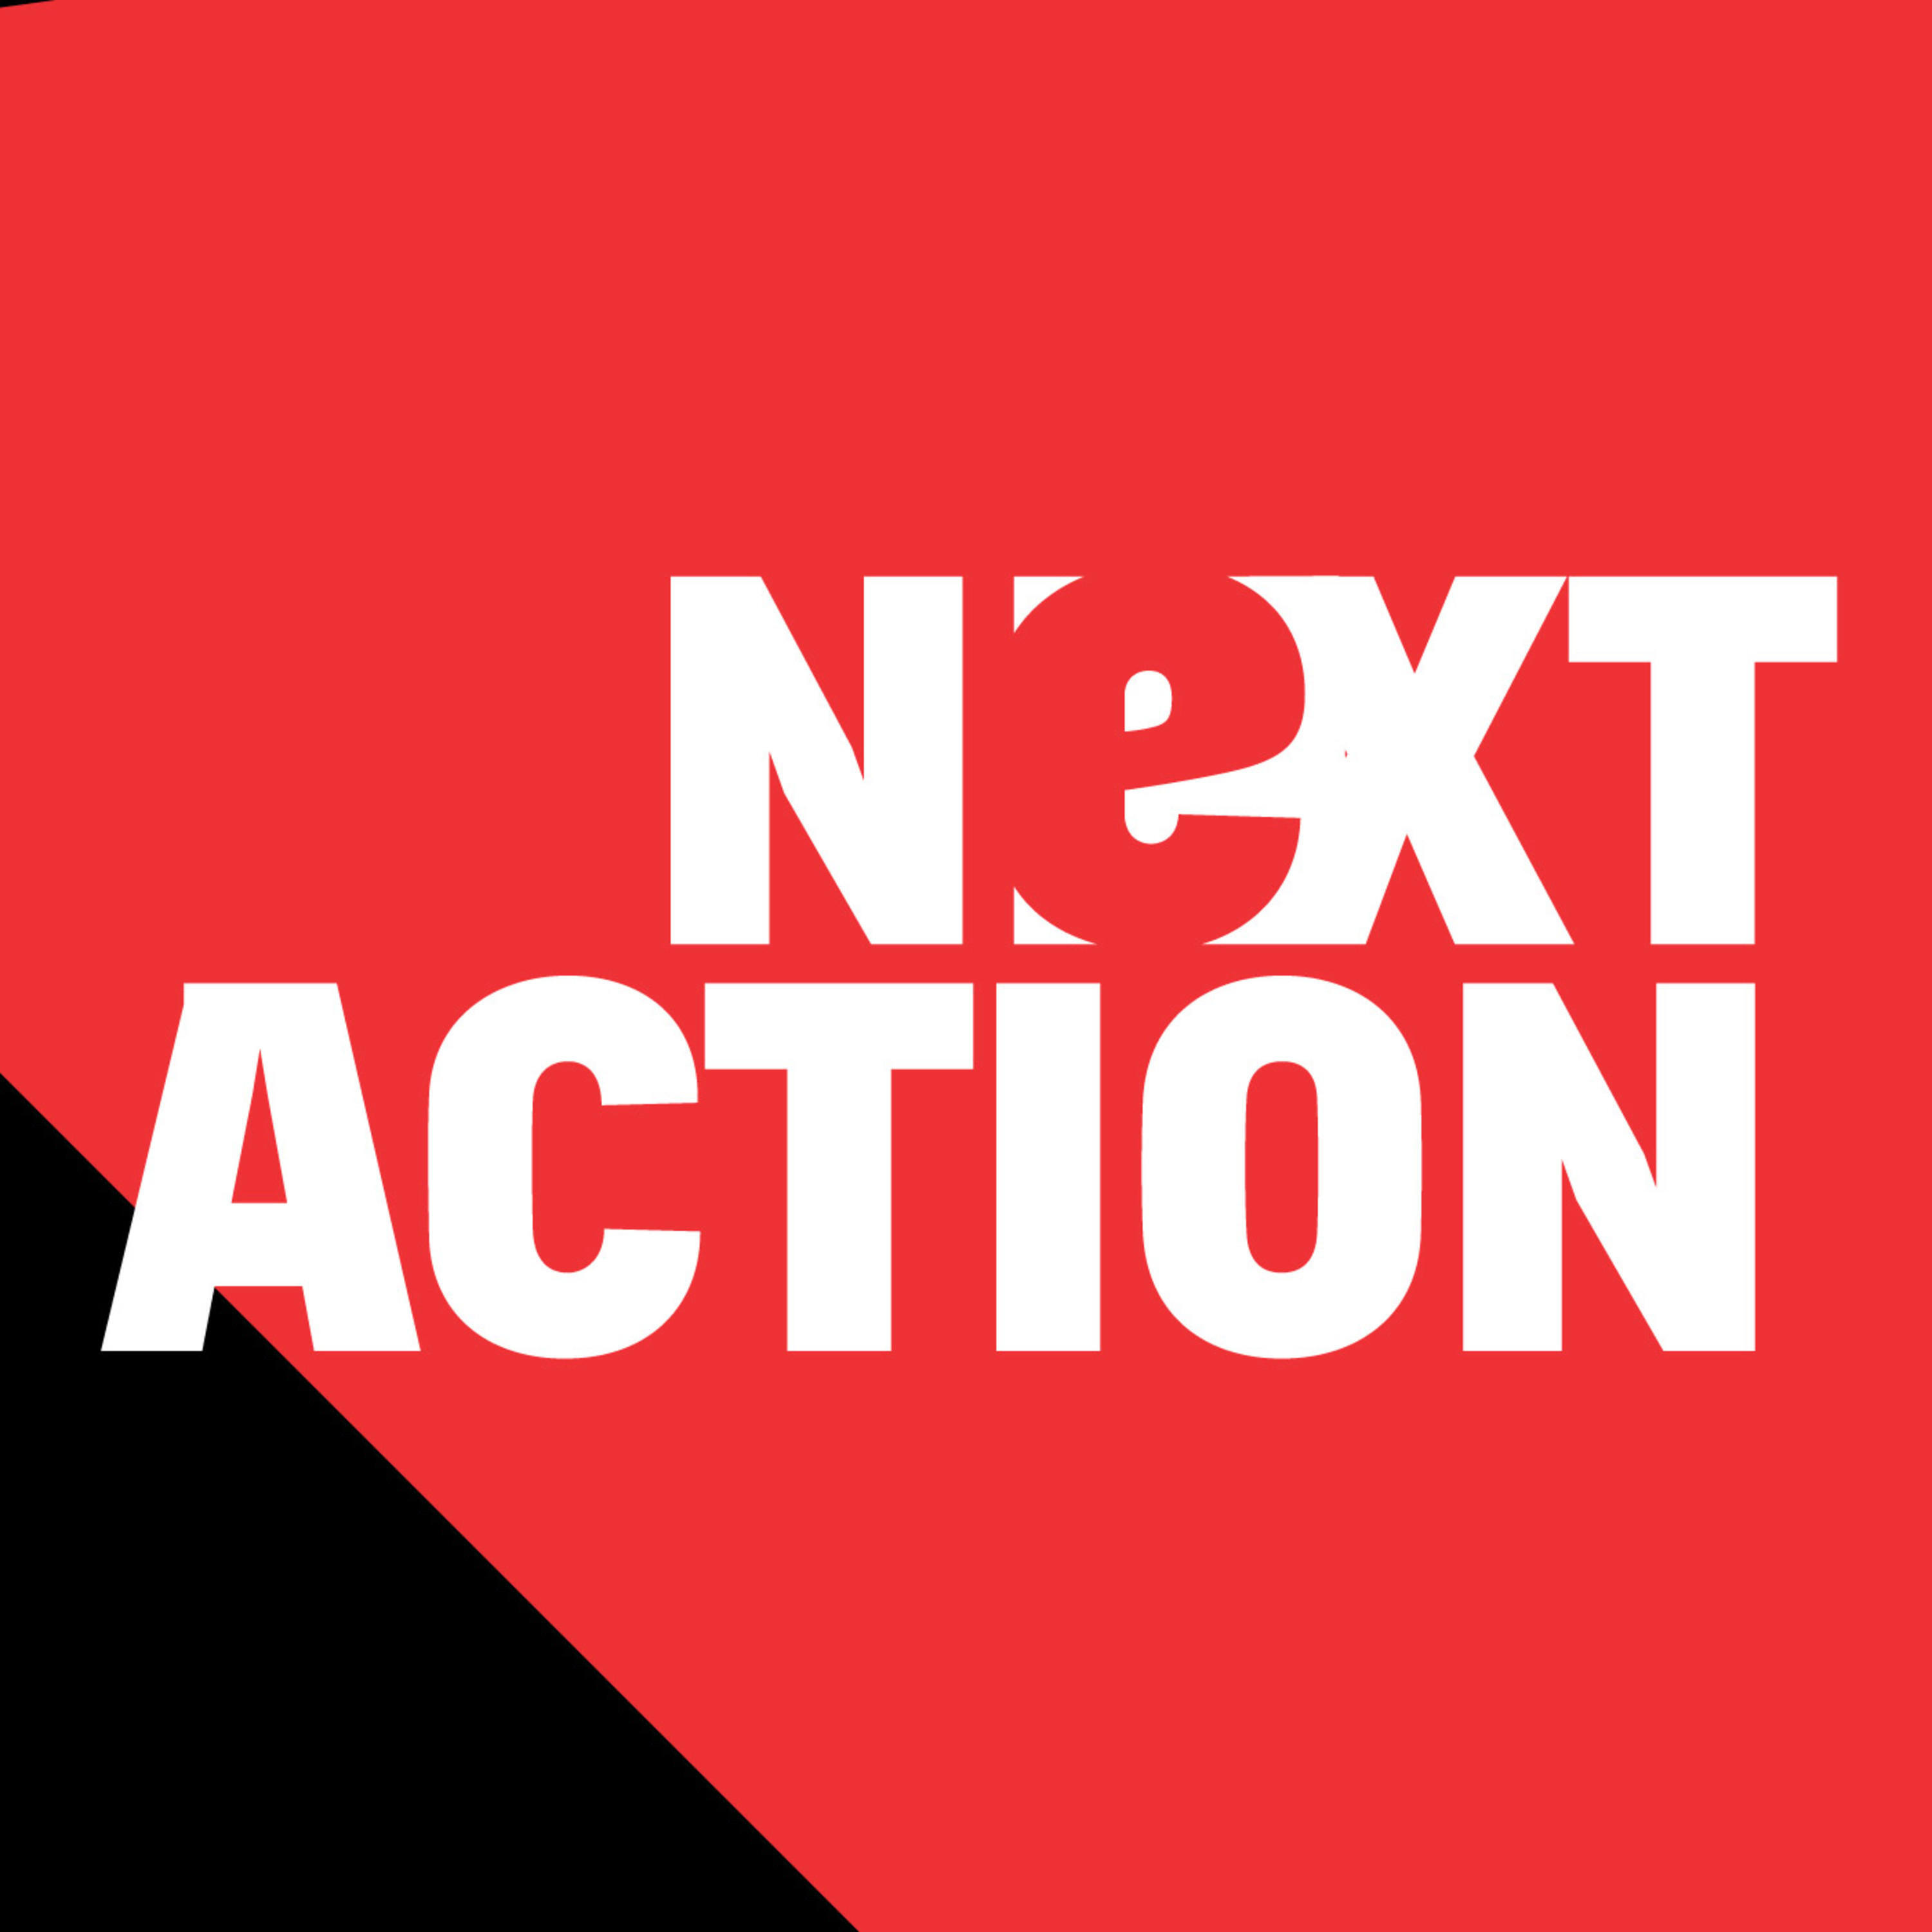 Next action. Next Actions.